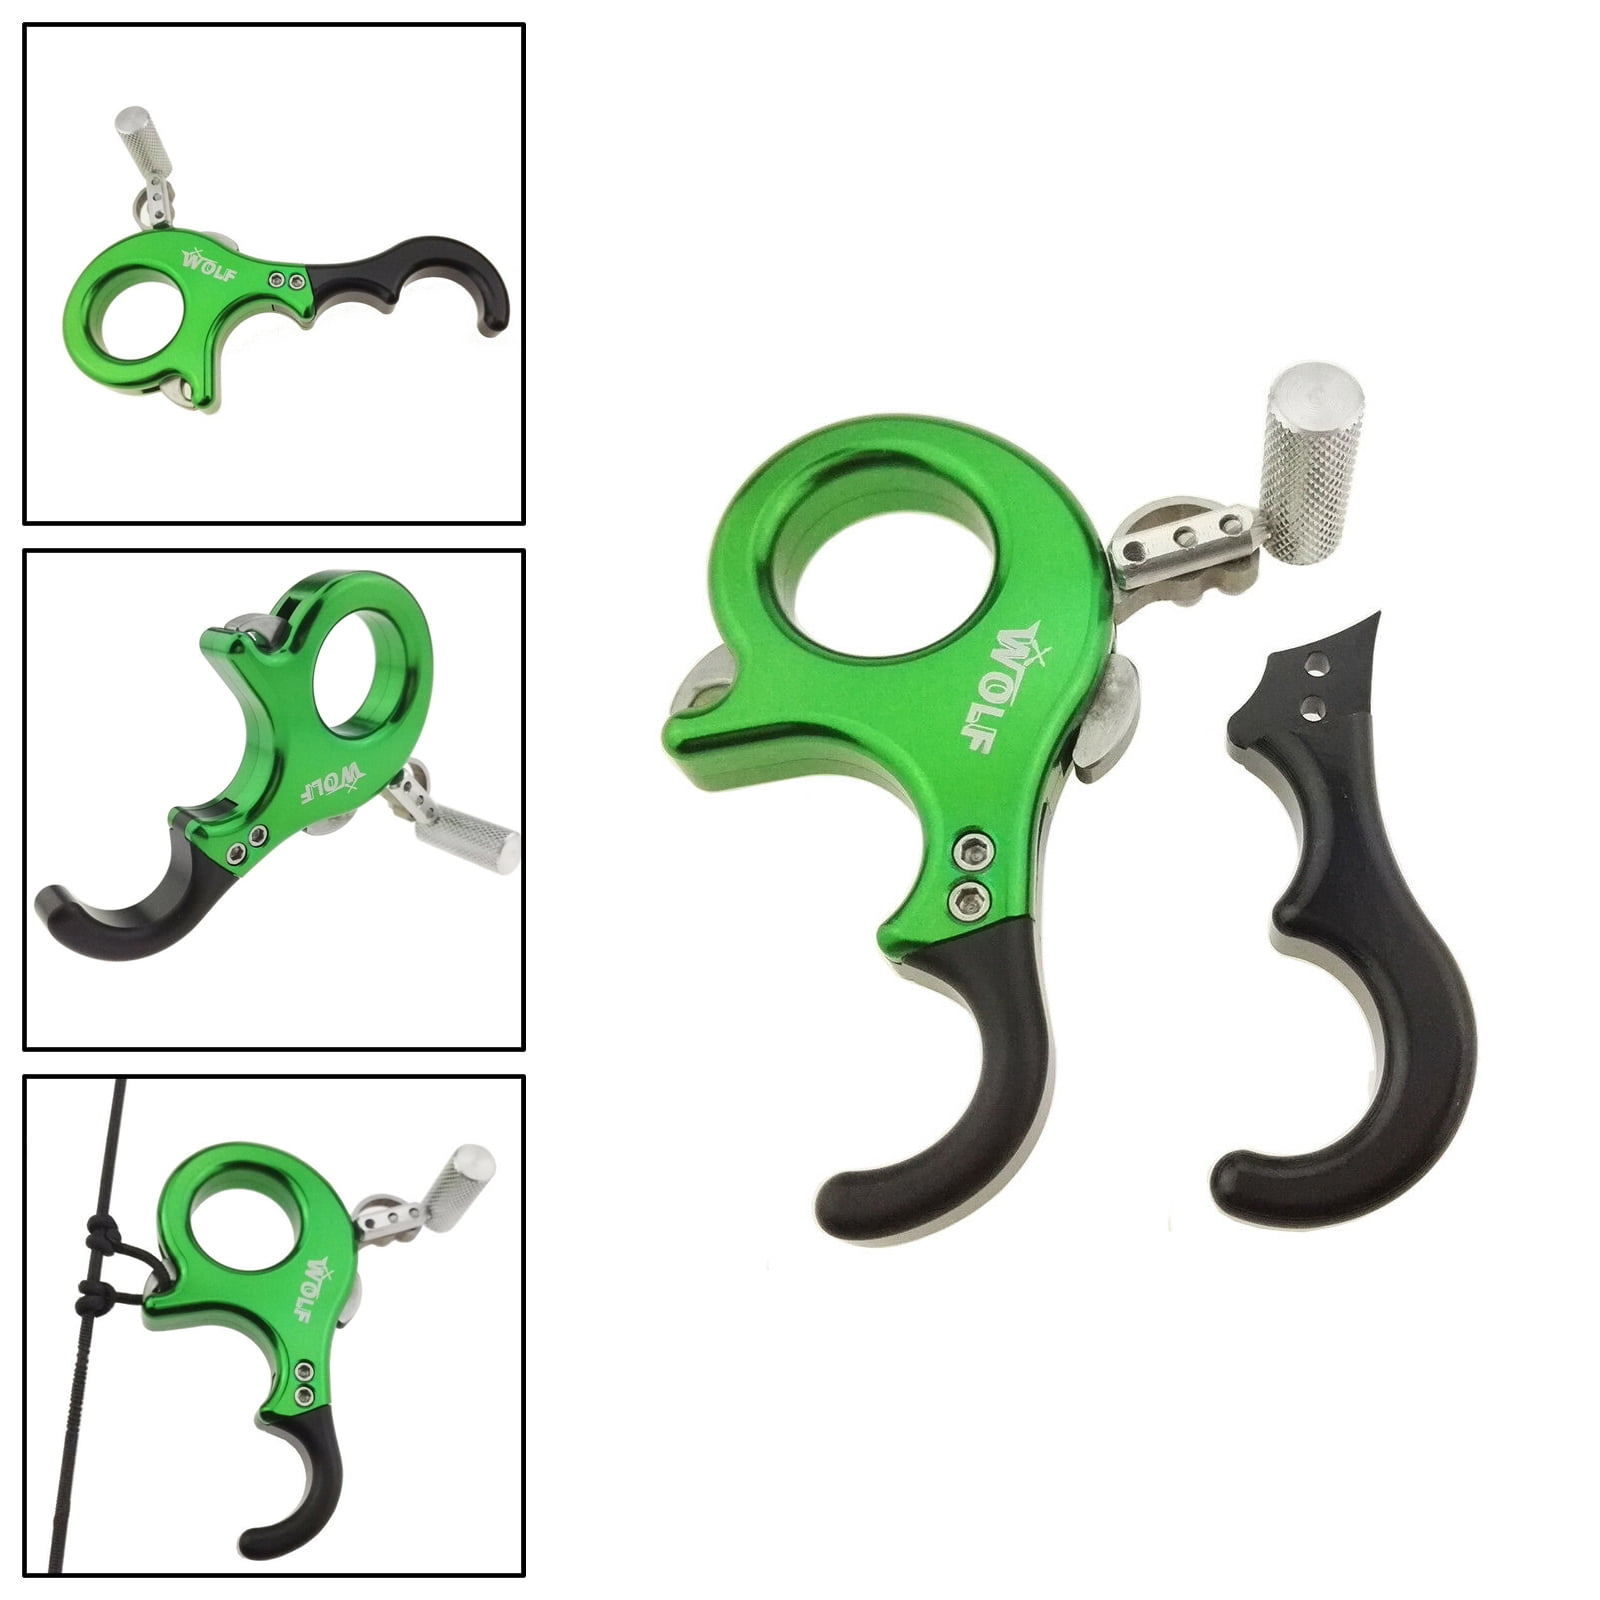 ZSHJG Bow Release Trigger Thumb 4 Finger Bow Release Thumb Caliper Compound Bow Button Release Aid Grip for Archery Accessory